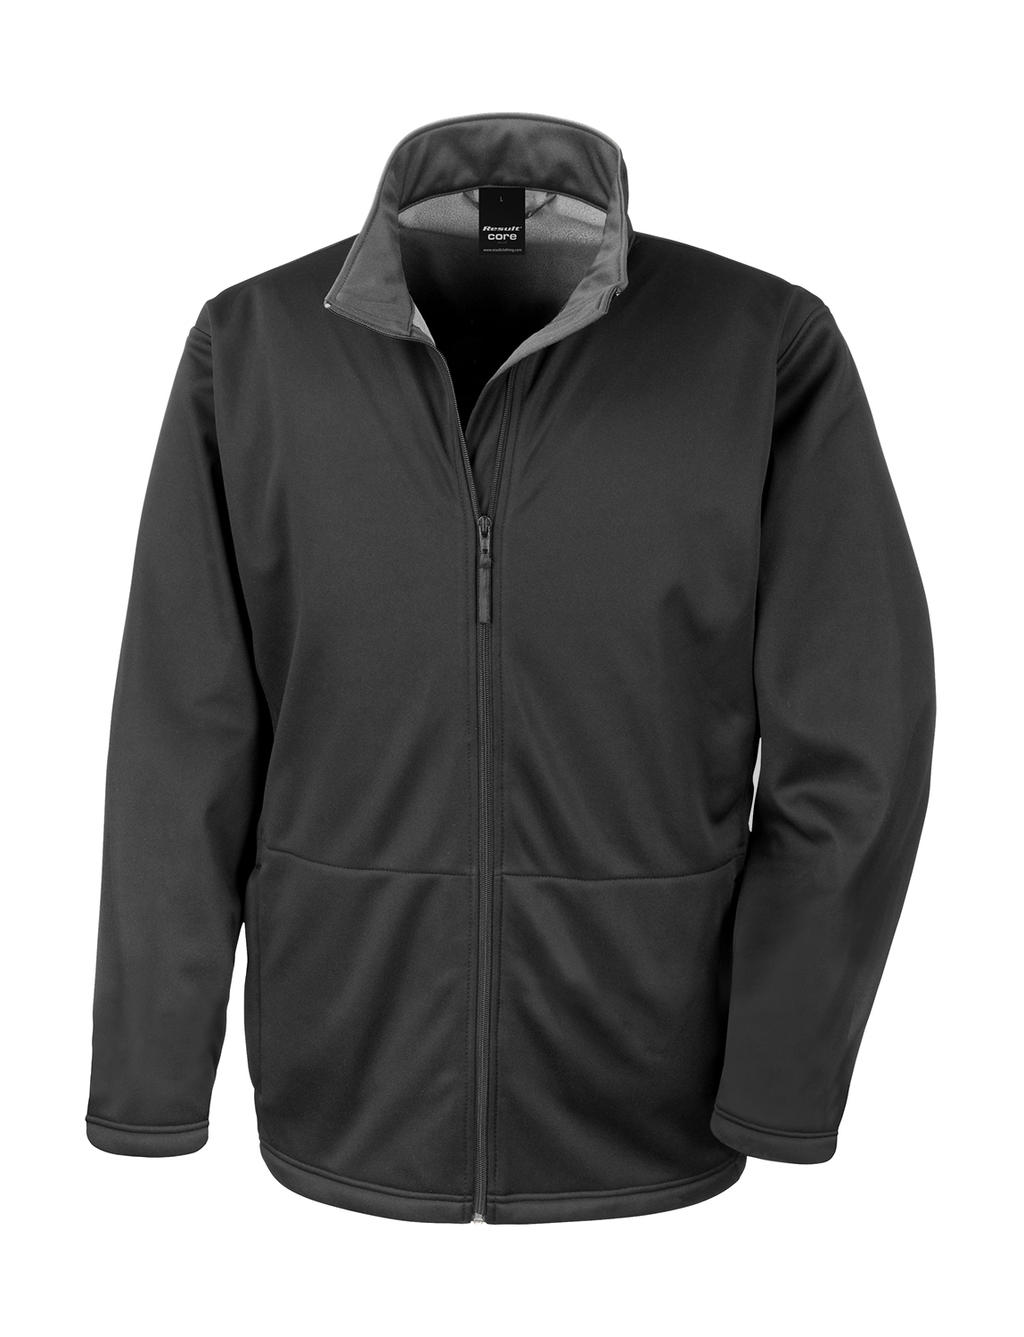  Core Softshell Jacket in Farbe Black